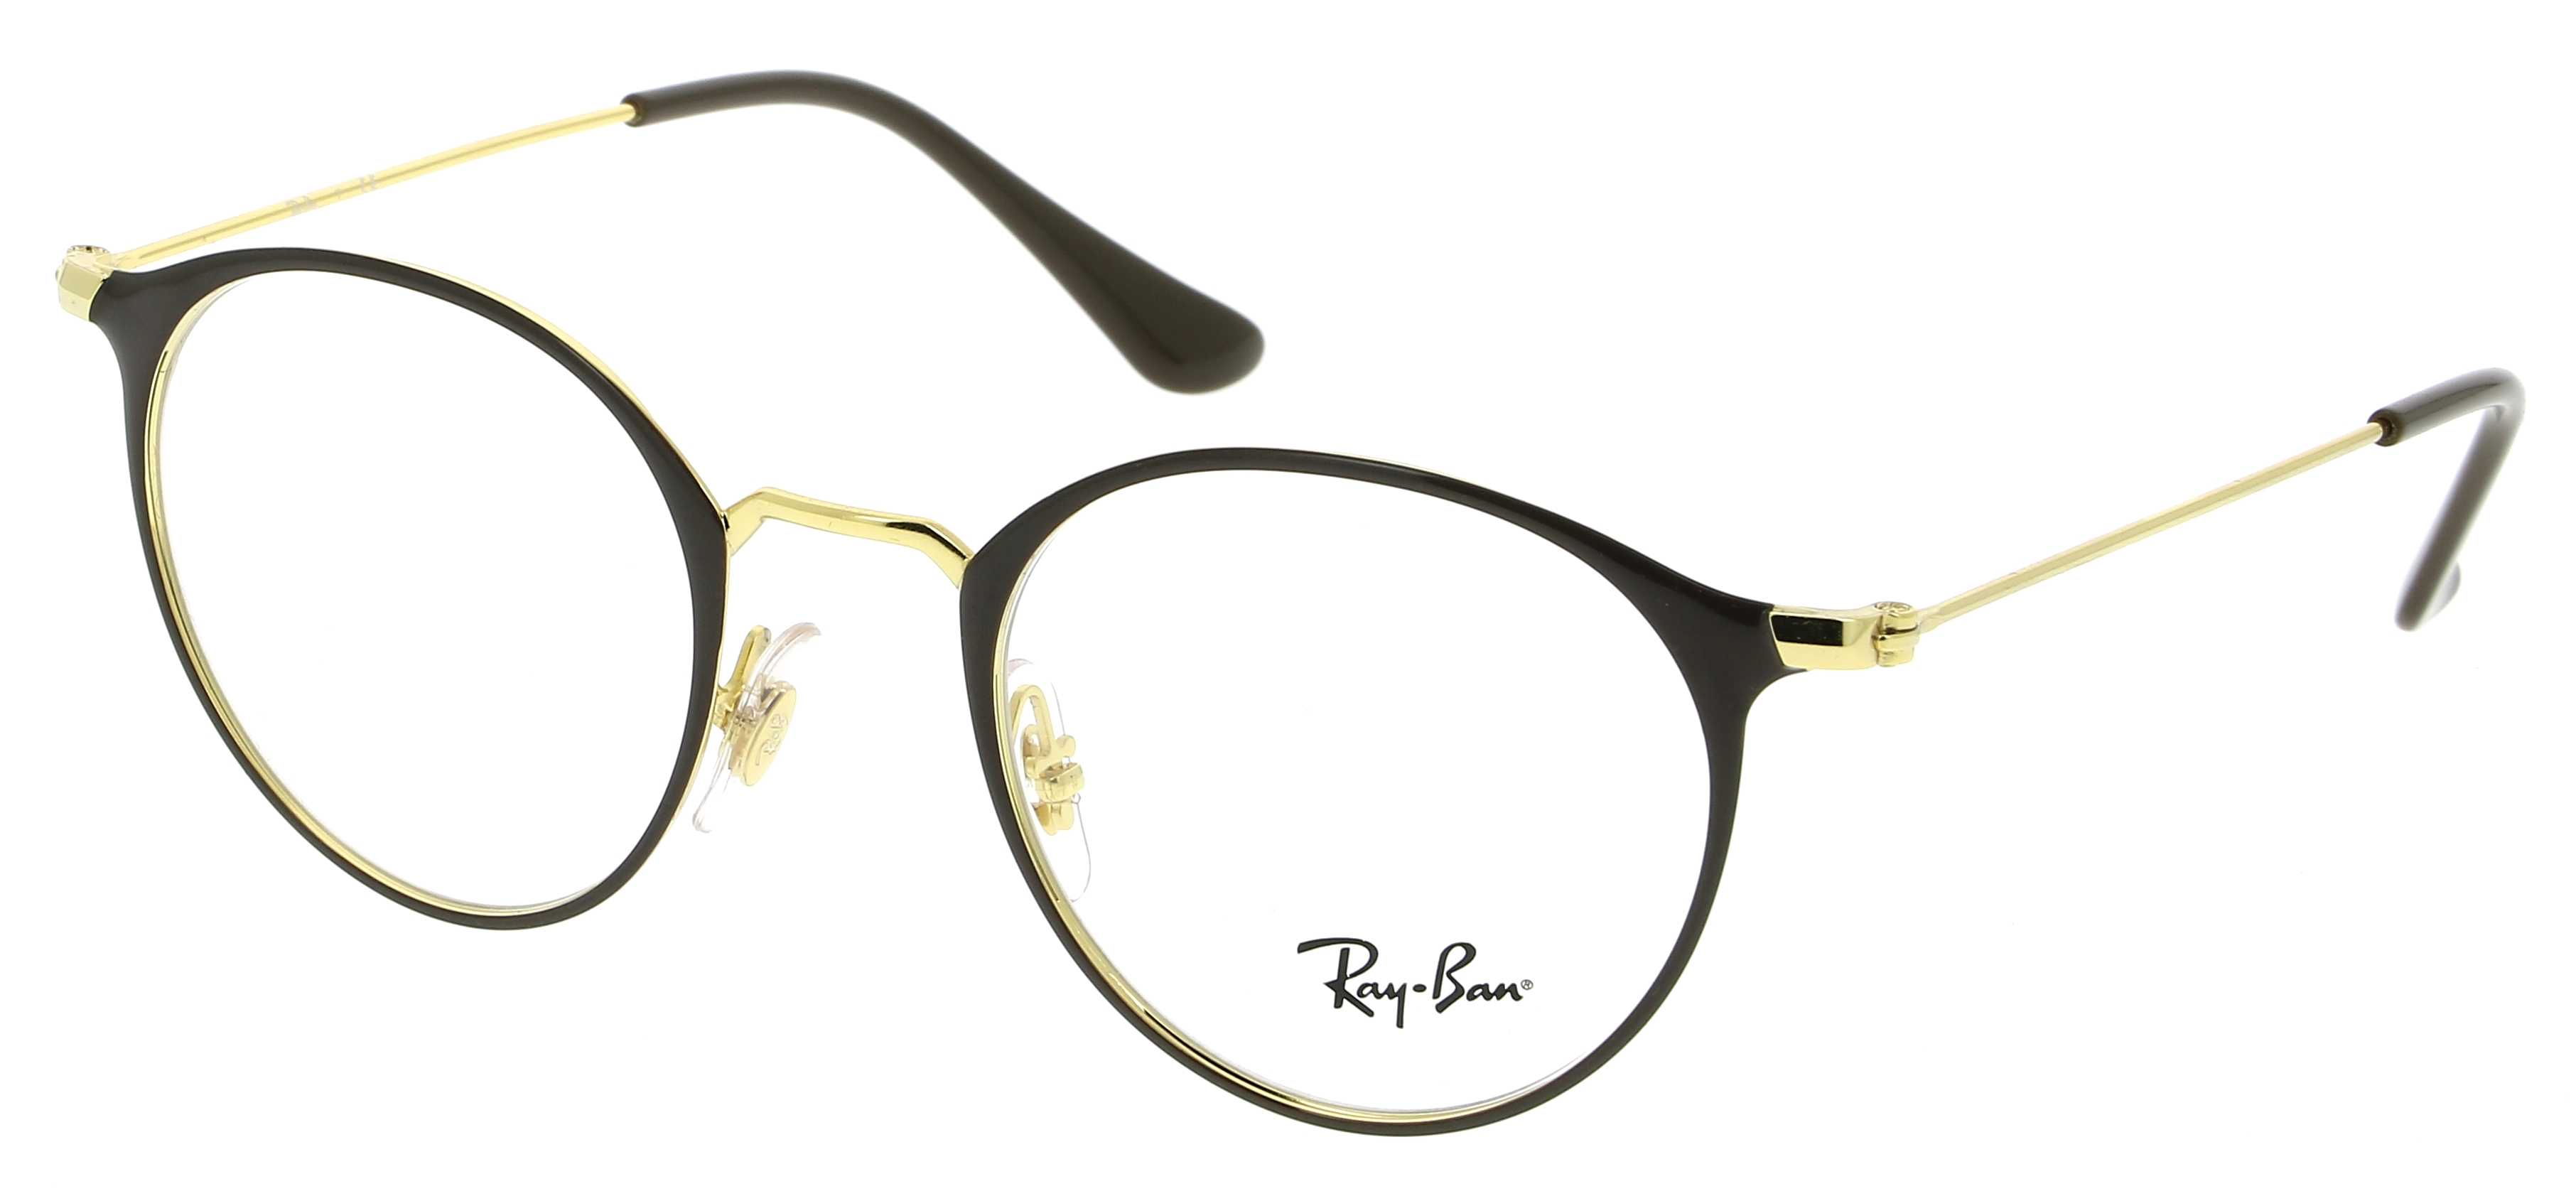 ray ban vue femme